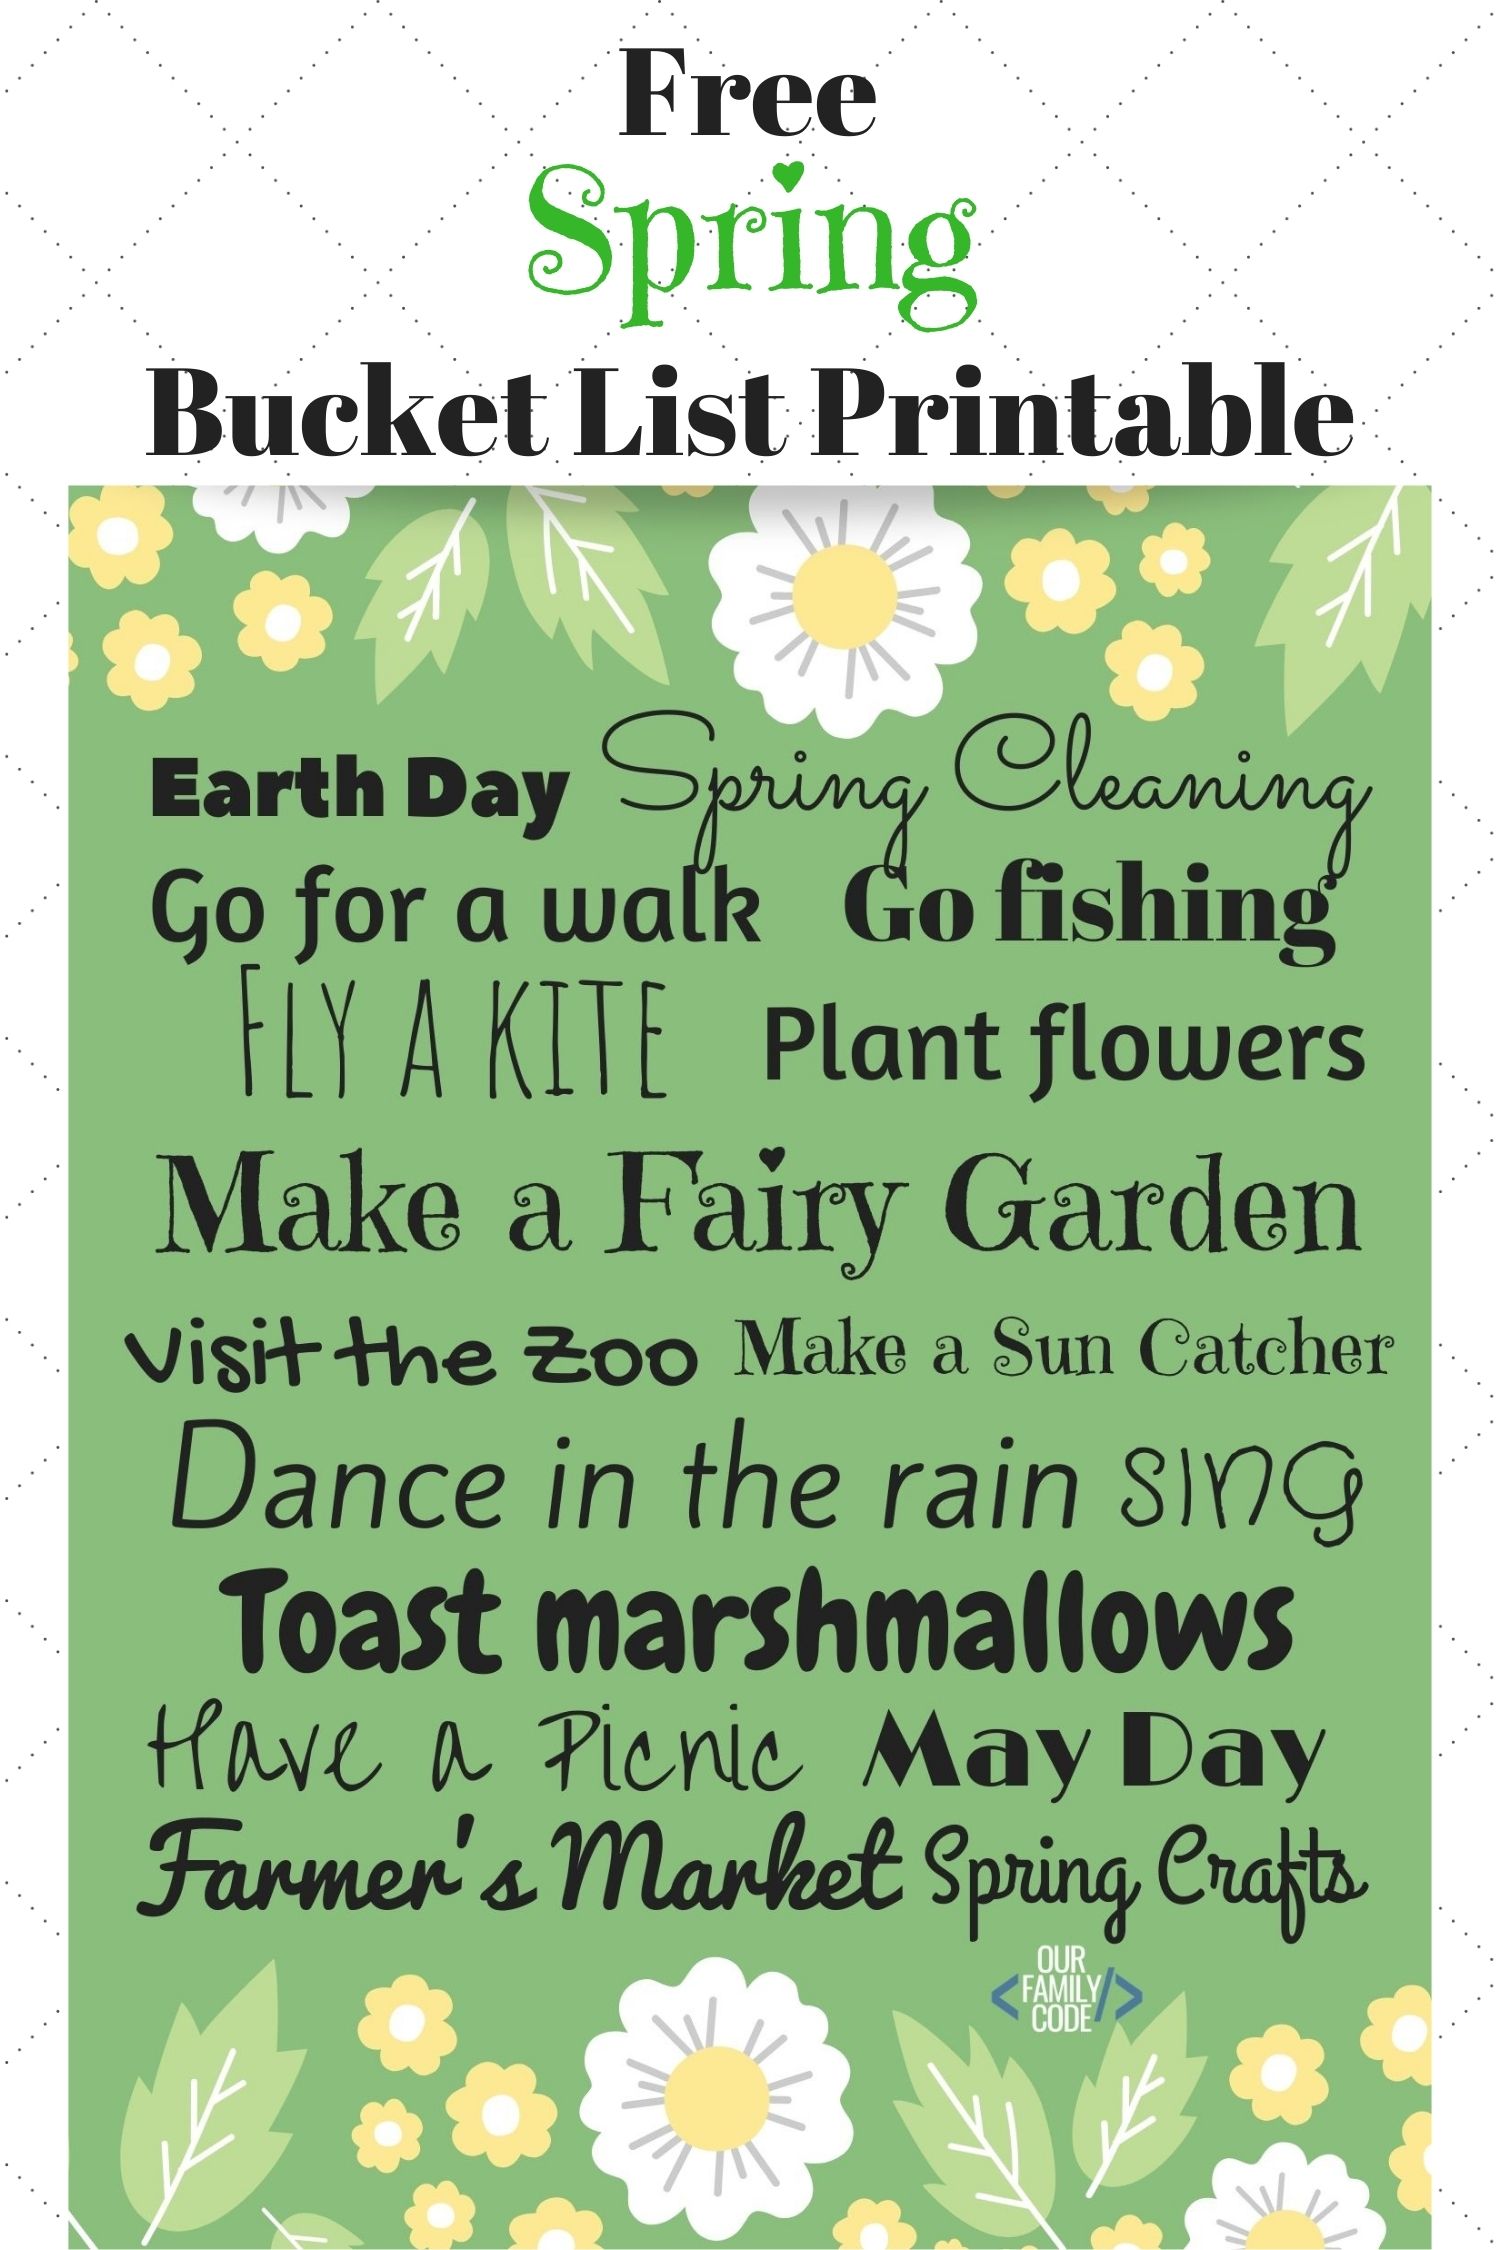 A picture of a Spring Bucket List Printable on white background.